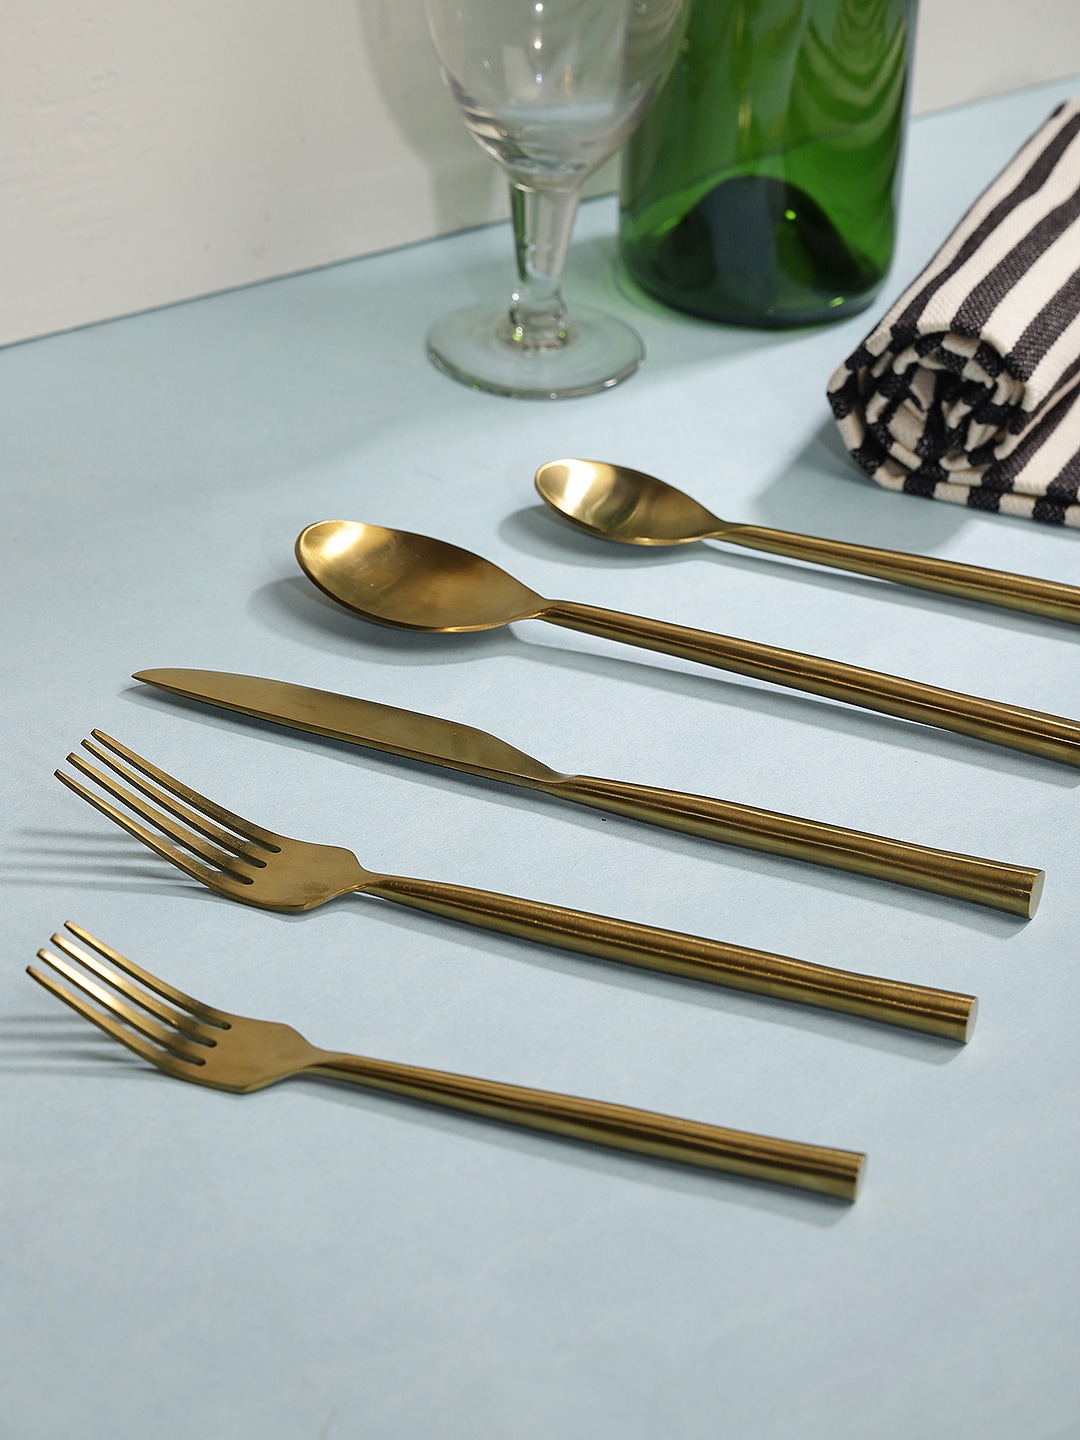 Chumbak Set Of 5 Muted Gold-Toned Solid Dishwasher Safe Stainless Steel Spoon Set Price in India